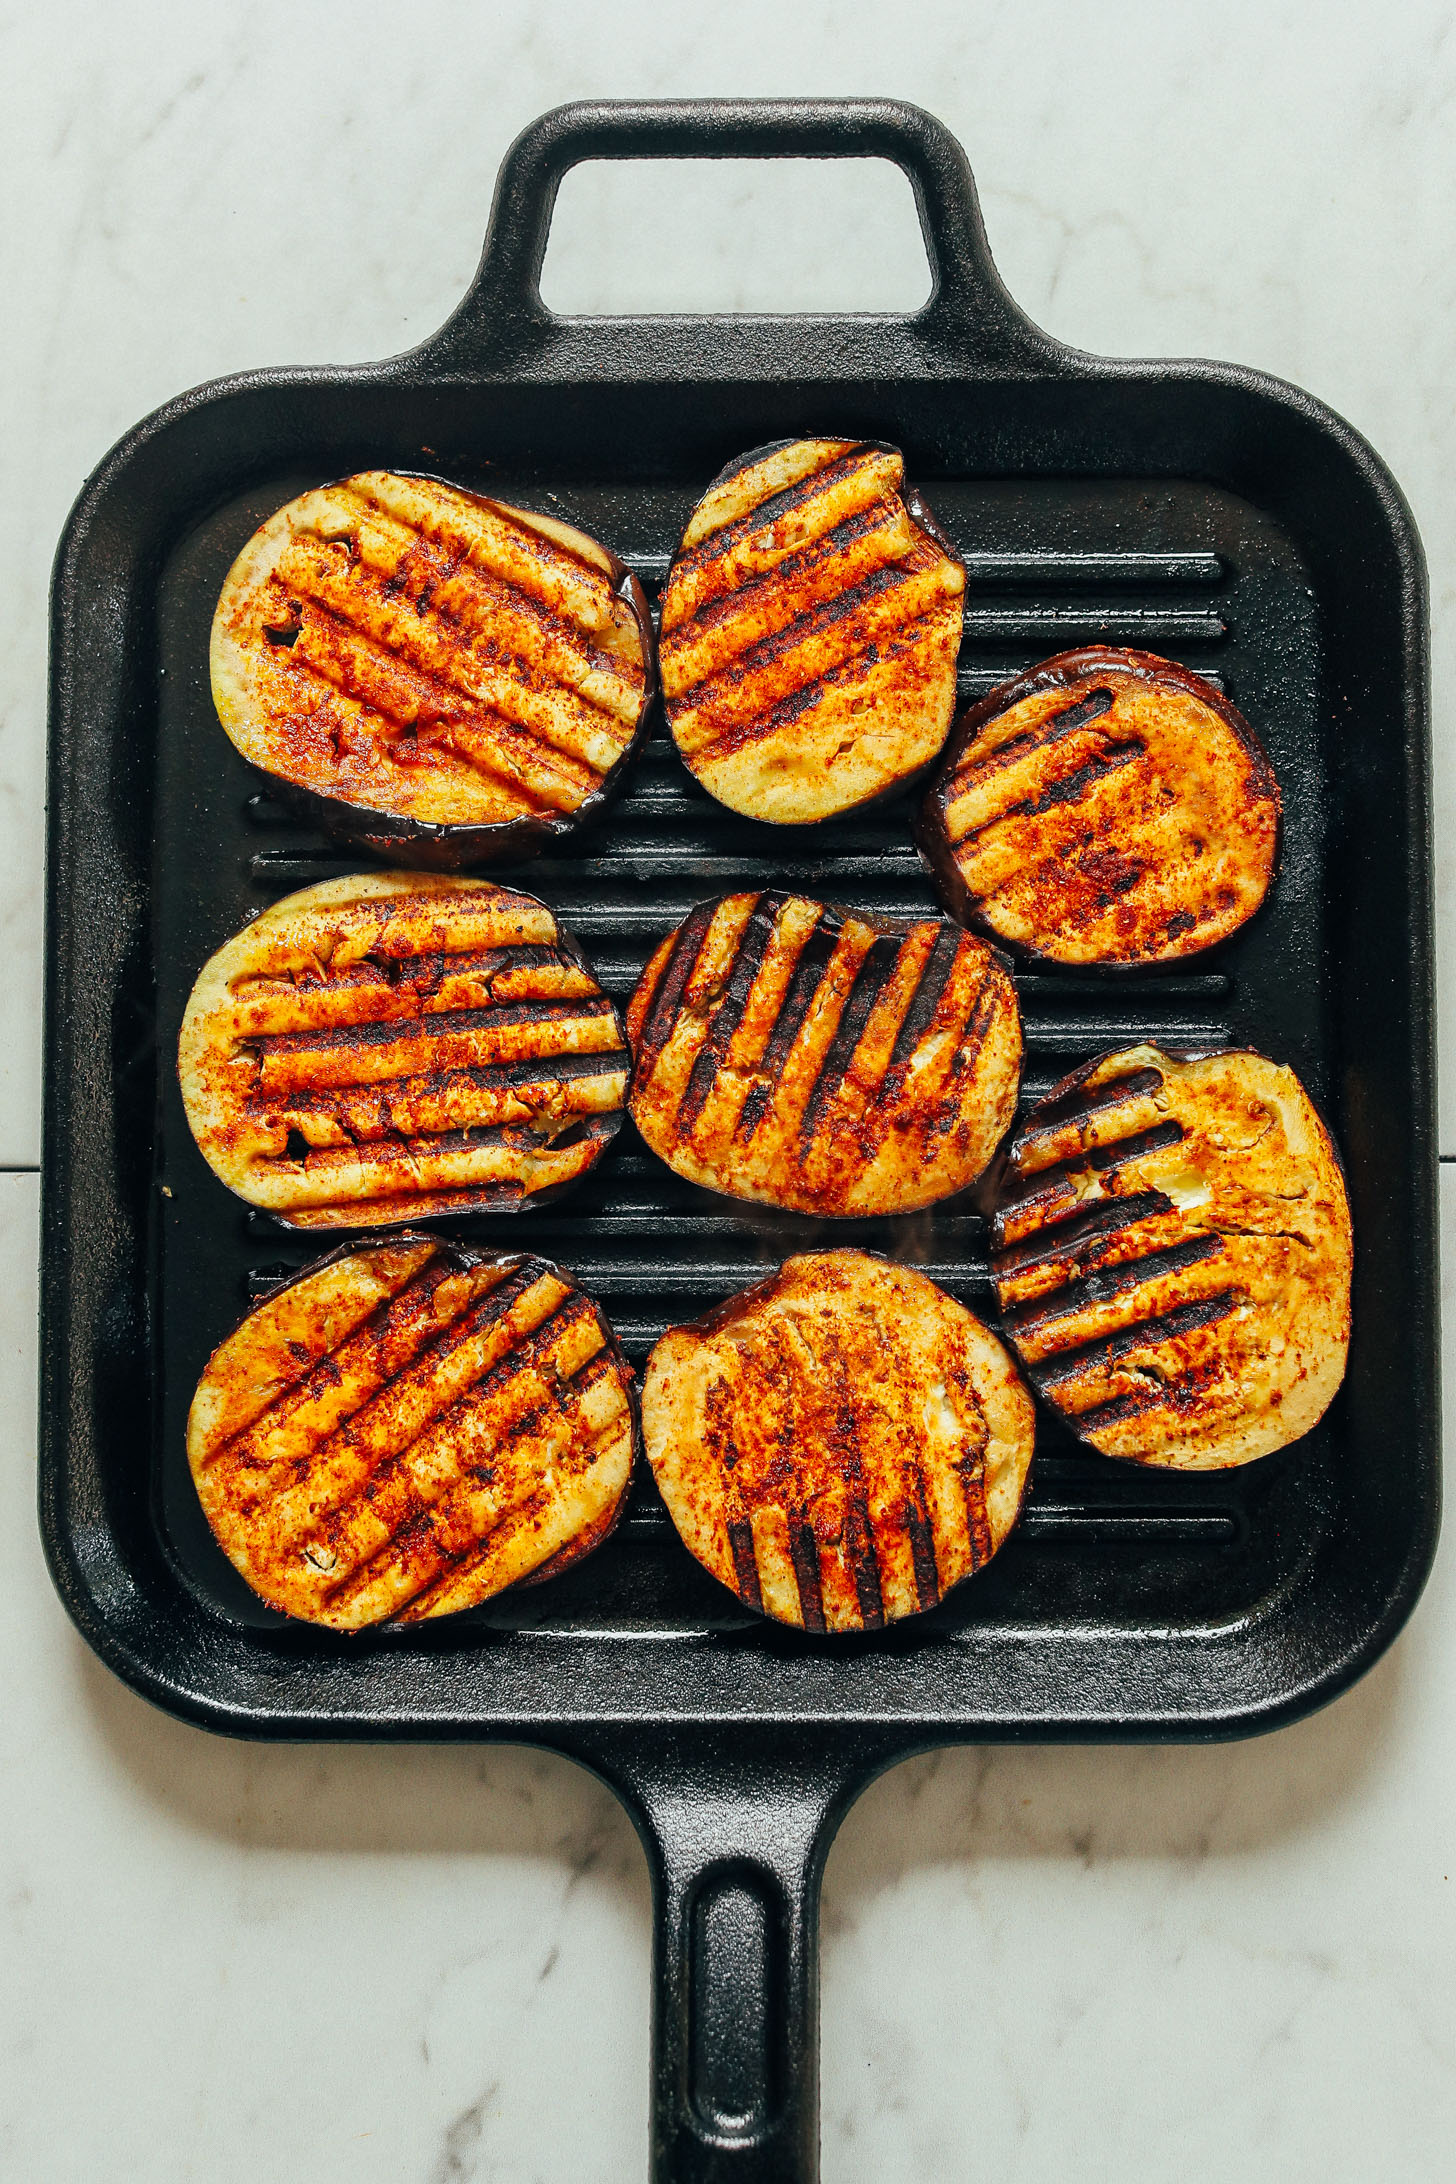 A overhead shot of eggplant slices seasoned with a spice blend and grill marks.